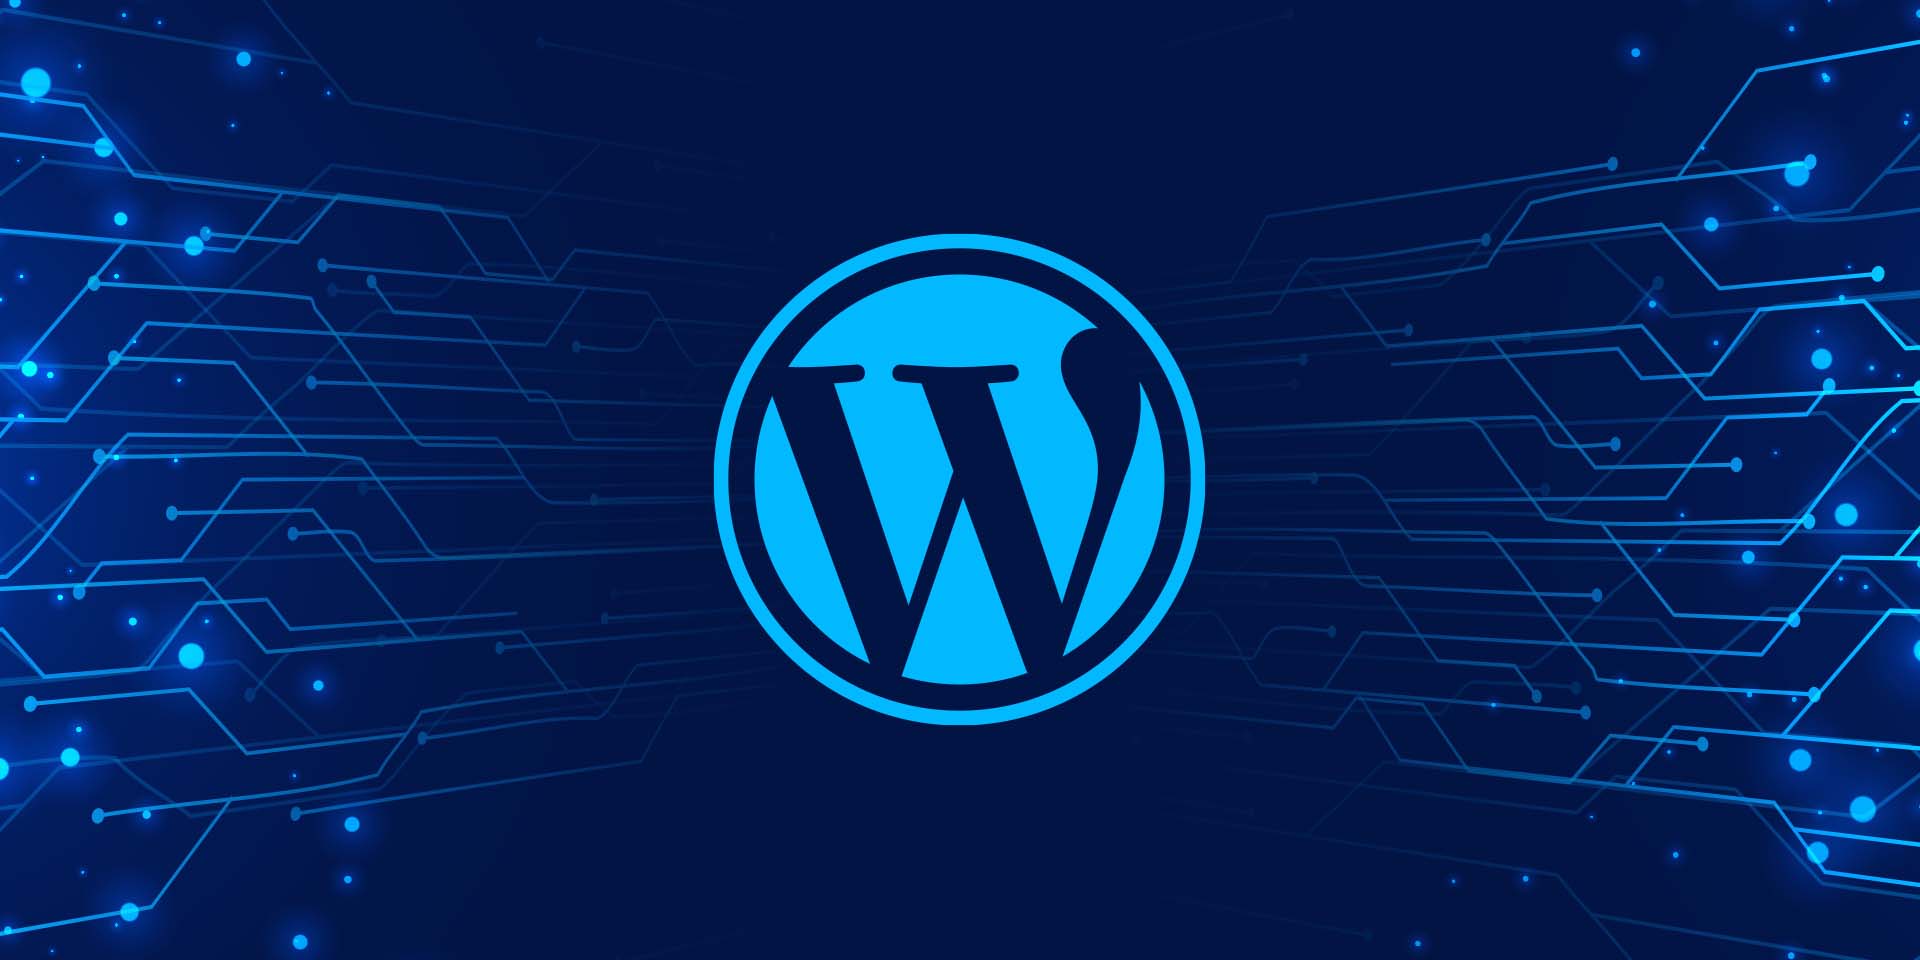 WordPress Multisite, Benefits and Where to Use it